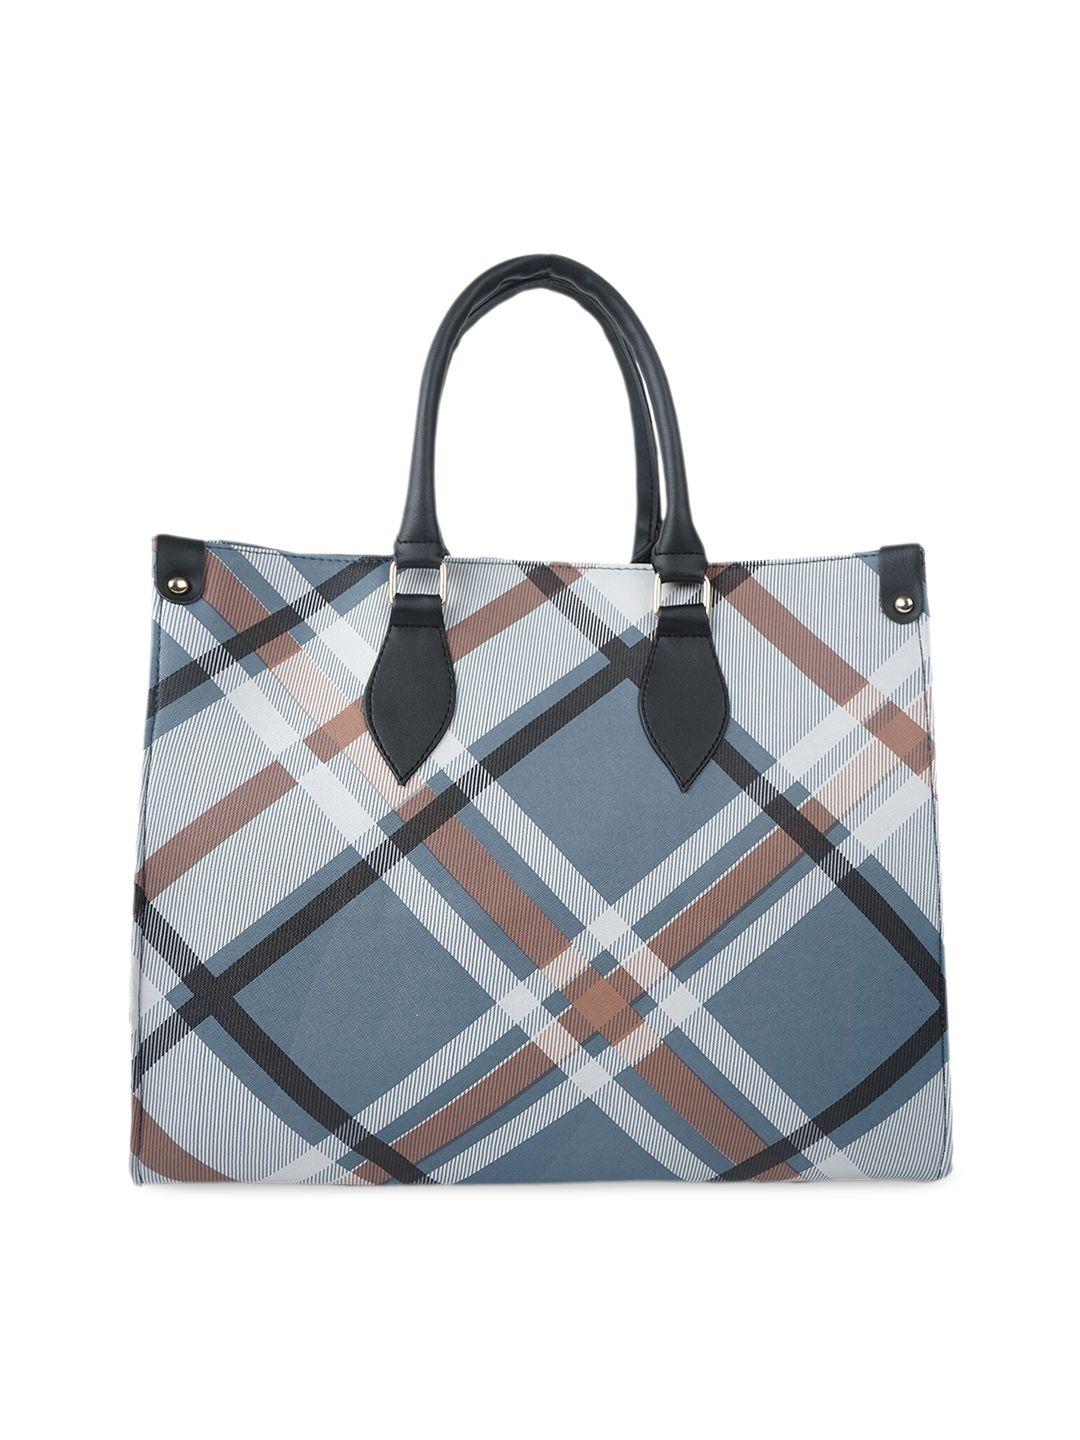 fargo checked structured tote bag